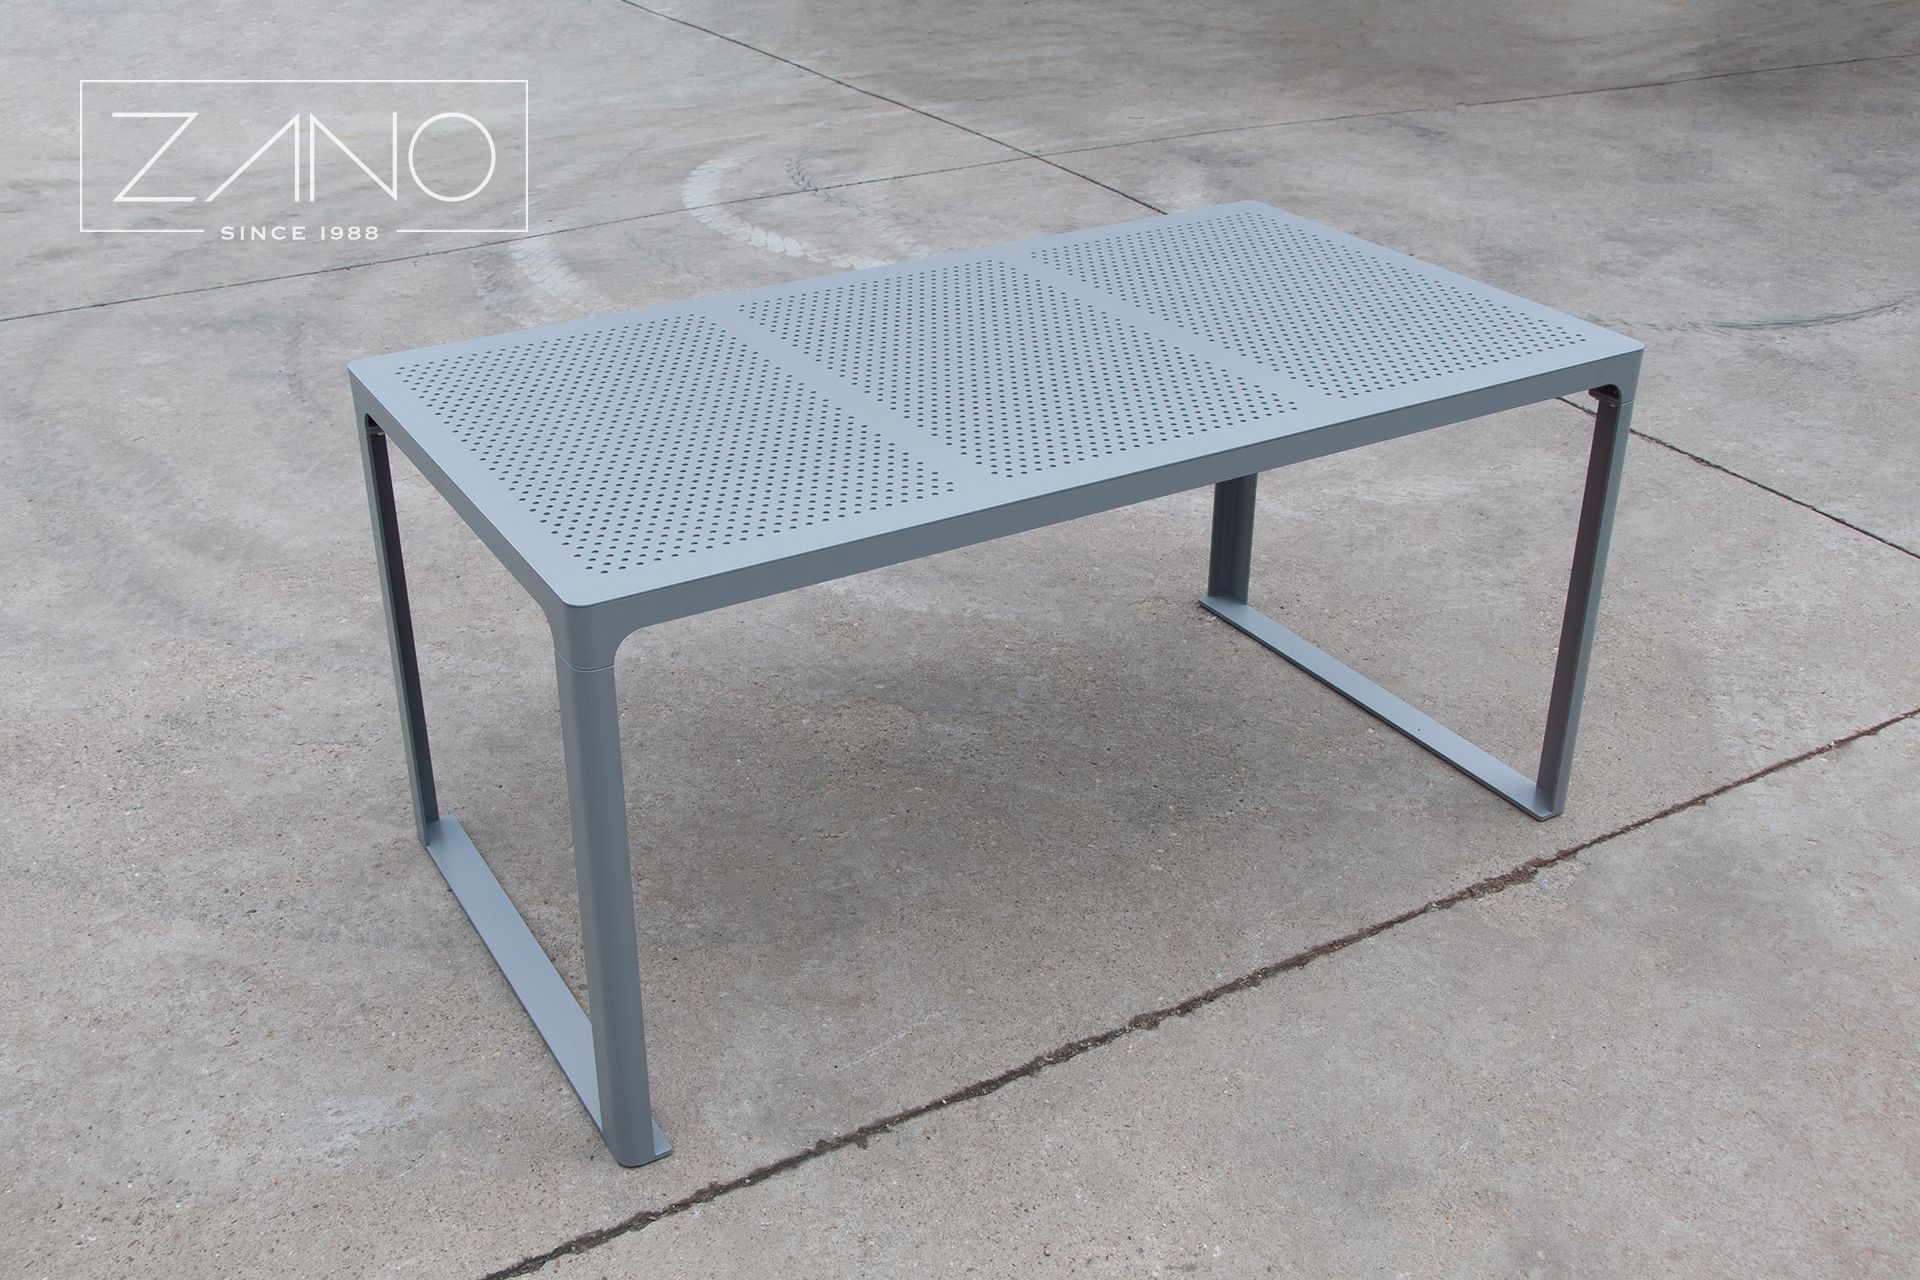 Large steel table | perforated stainless steel